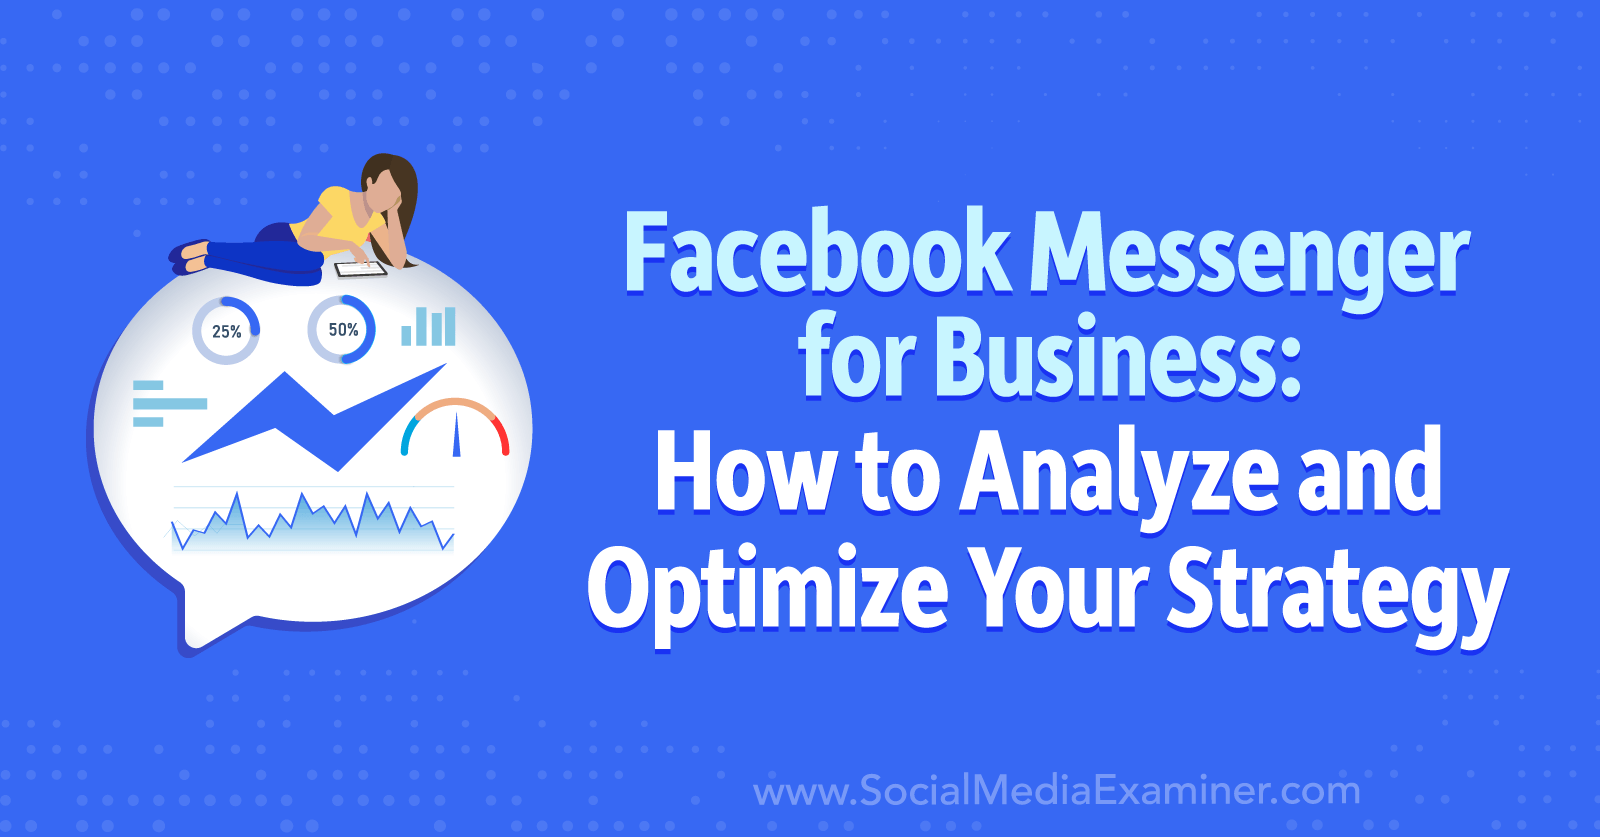 Facebook Messenger for Business: How to Analyze and Optimize Your